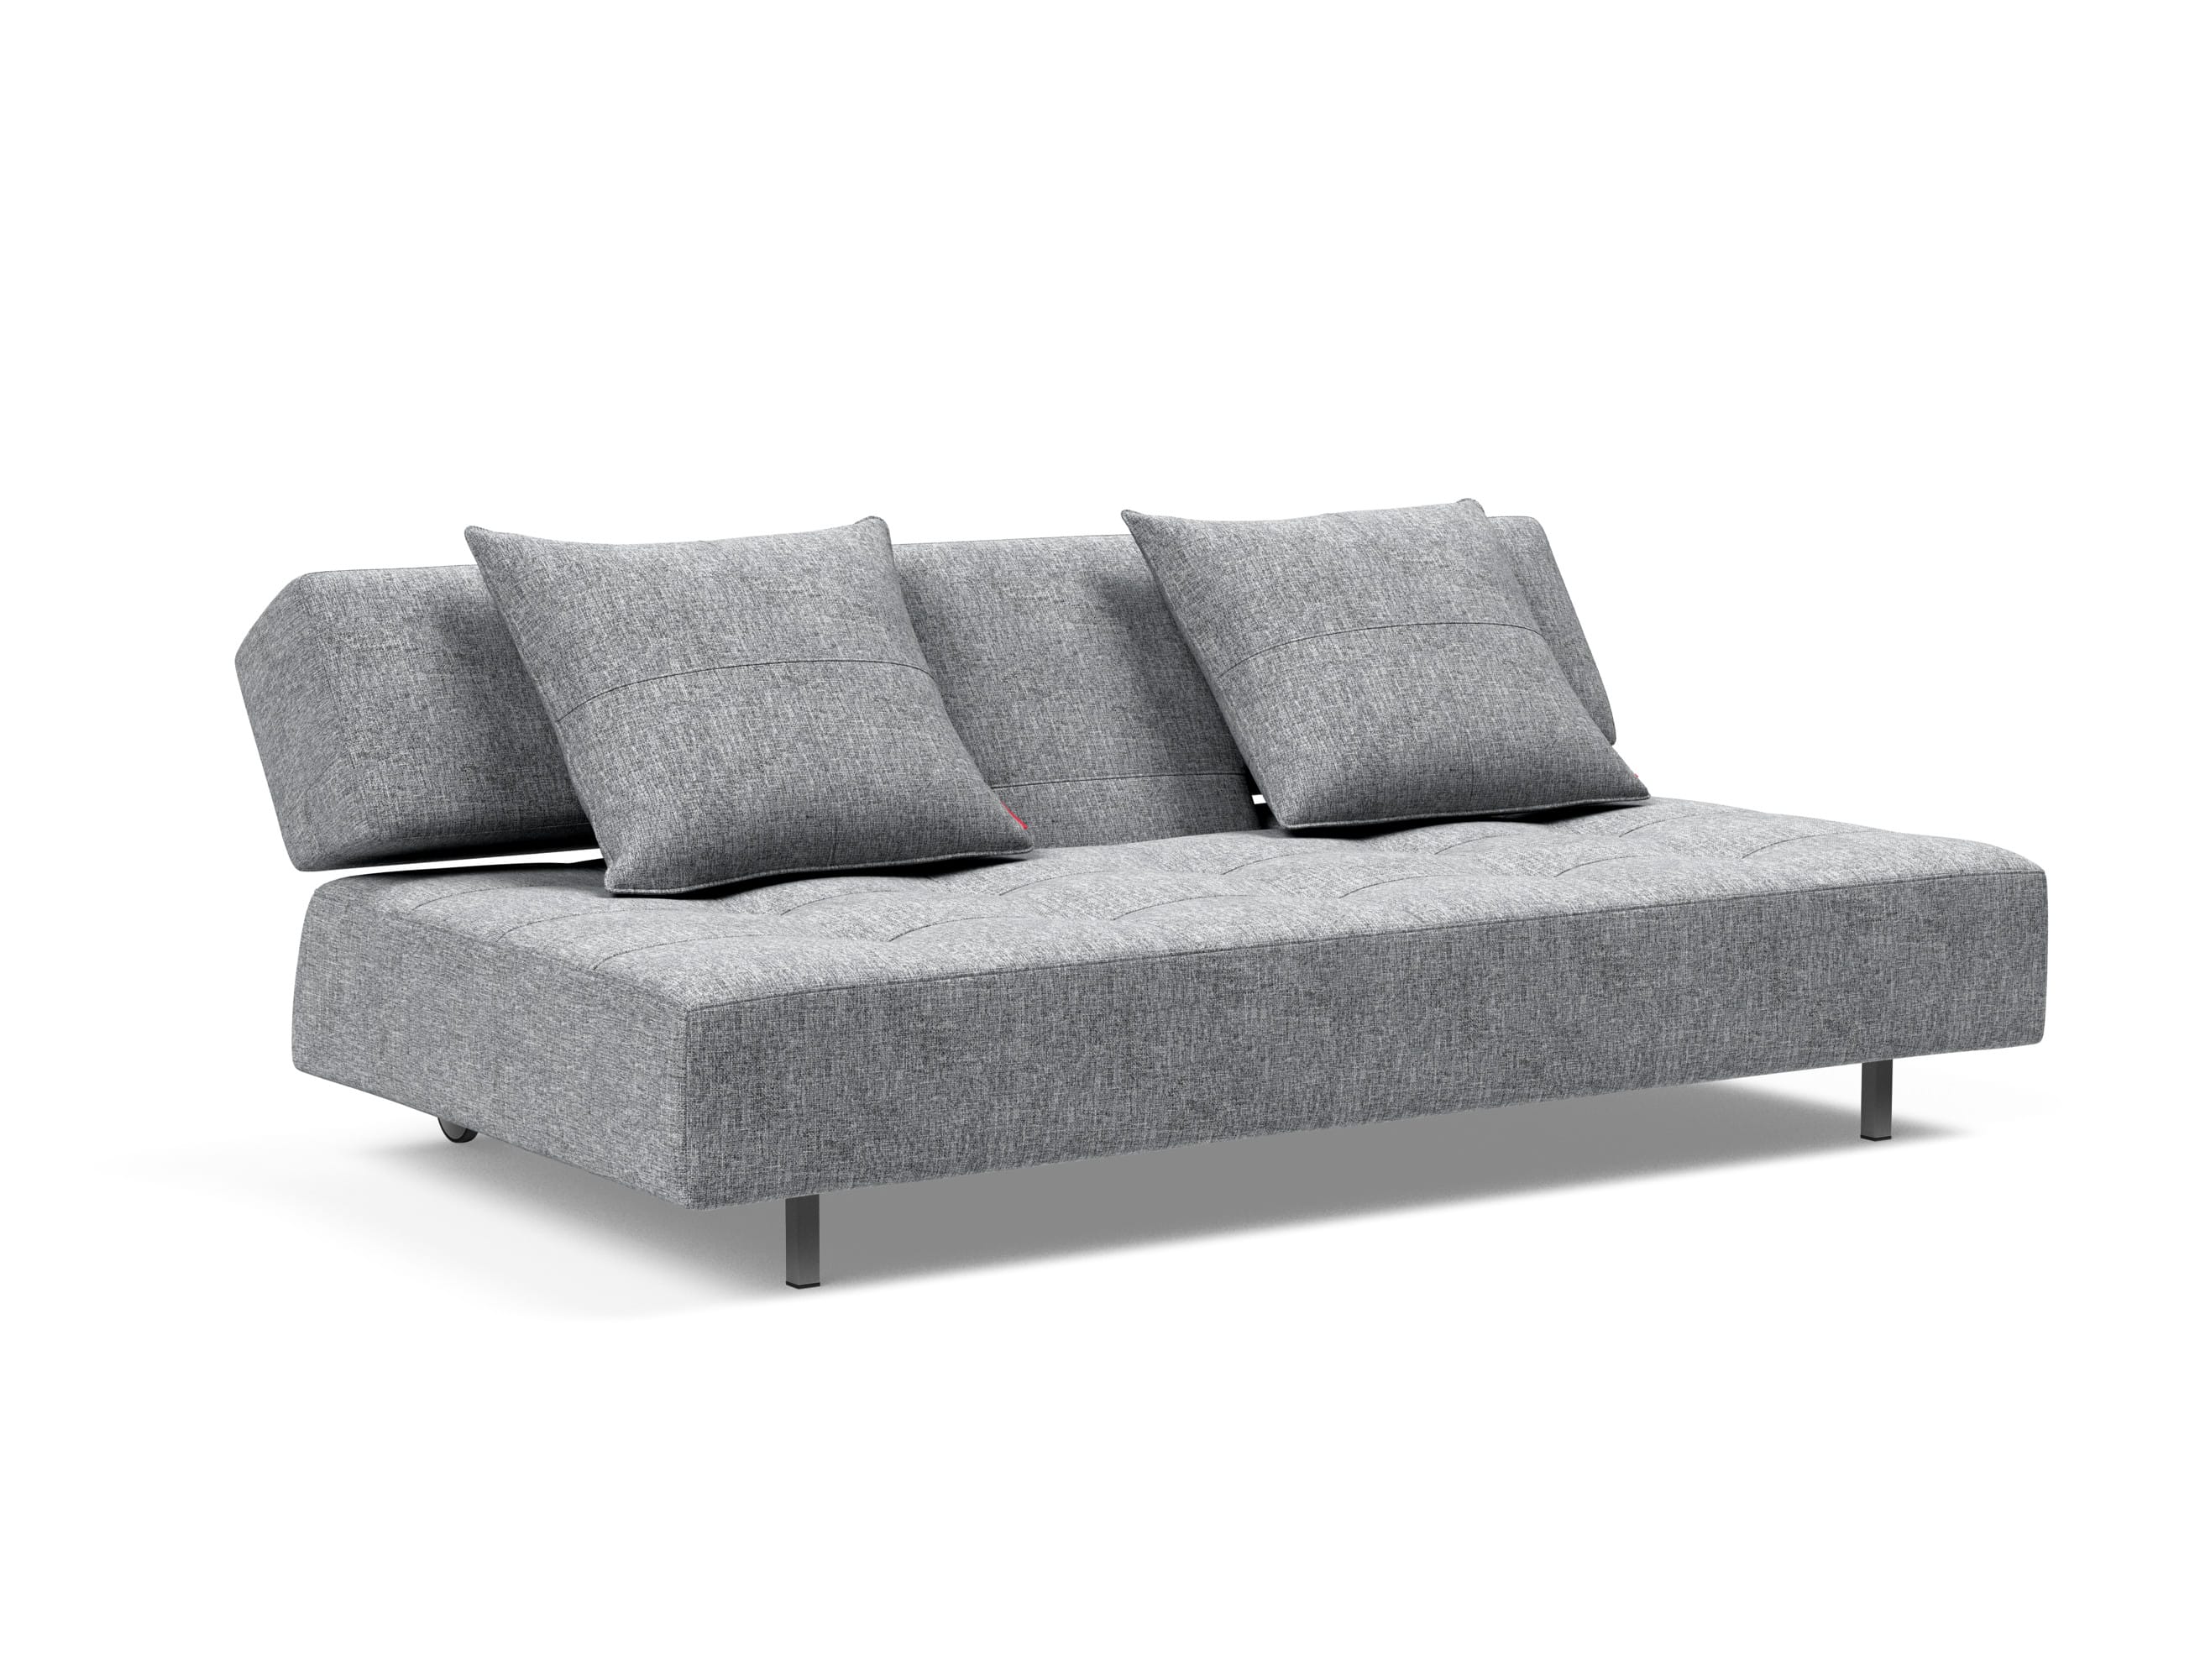 Long Horn Deluxe Sofa Twist Granite by Innovation